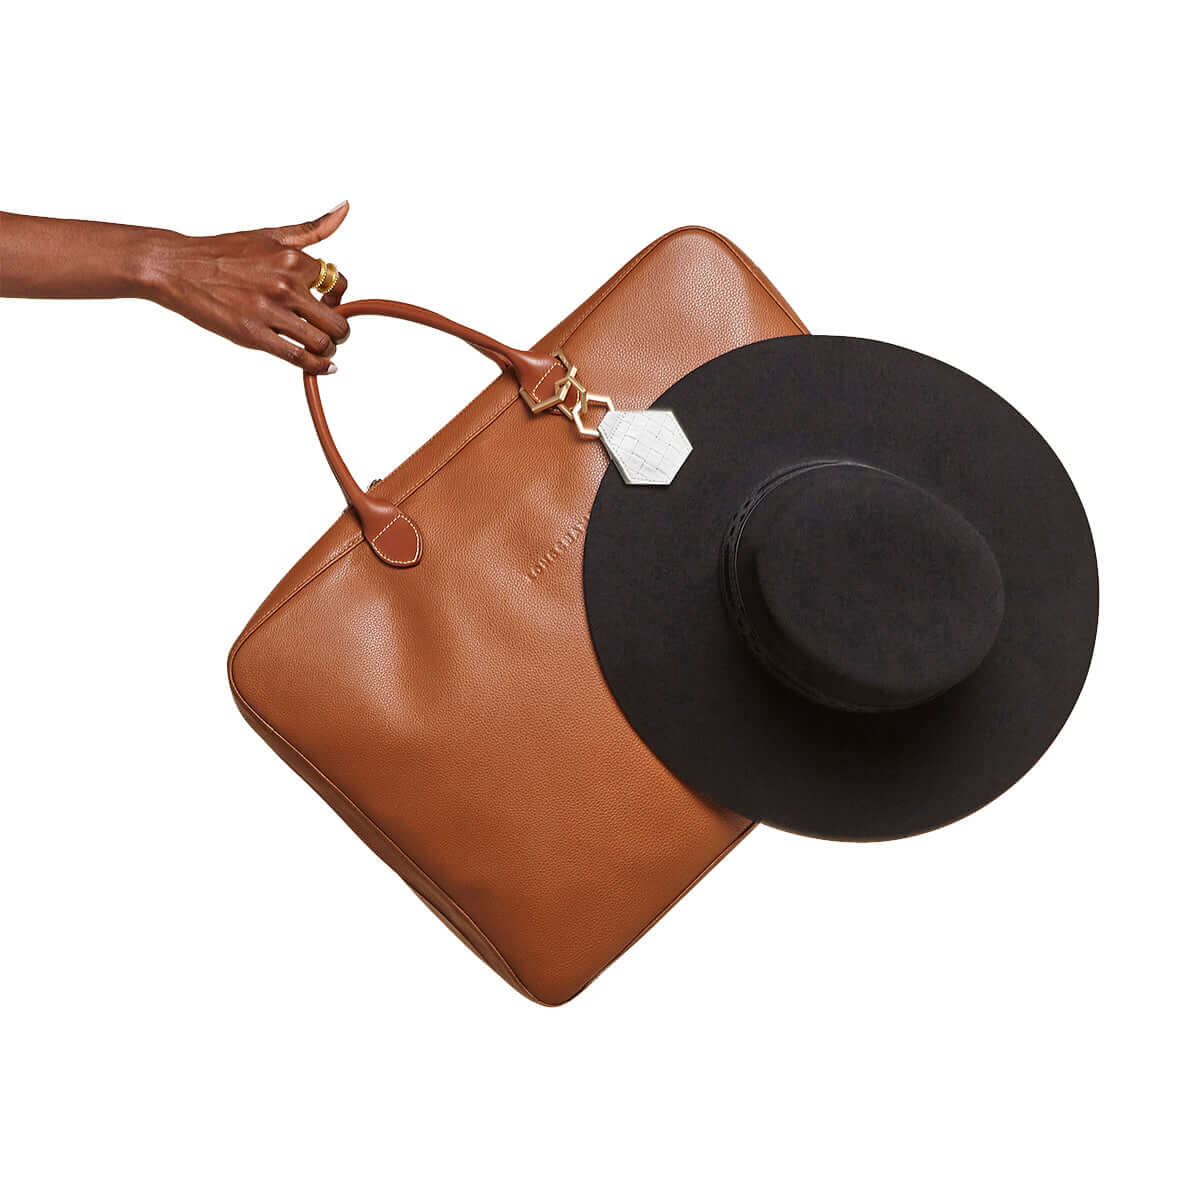 TOPTOTE by Lindsay Albanese magnetic hex hat clip with gold hardware and genuine leather attached to black felt hat